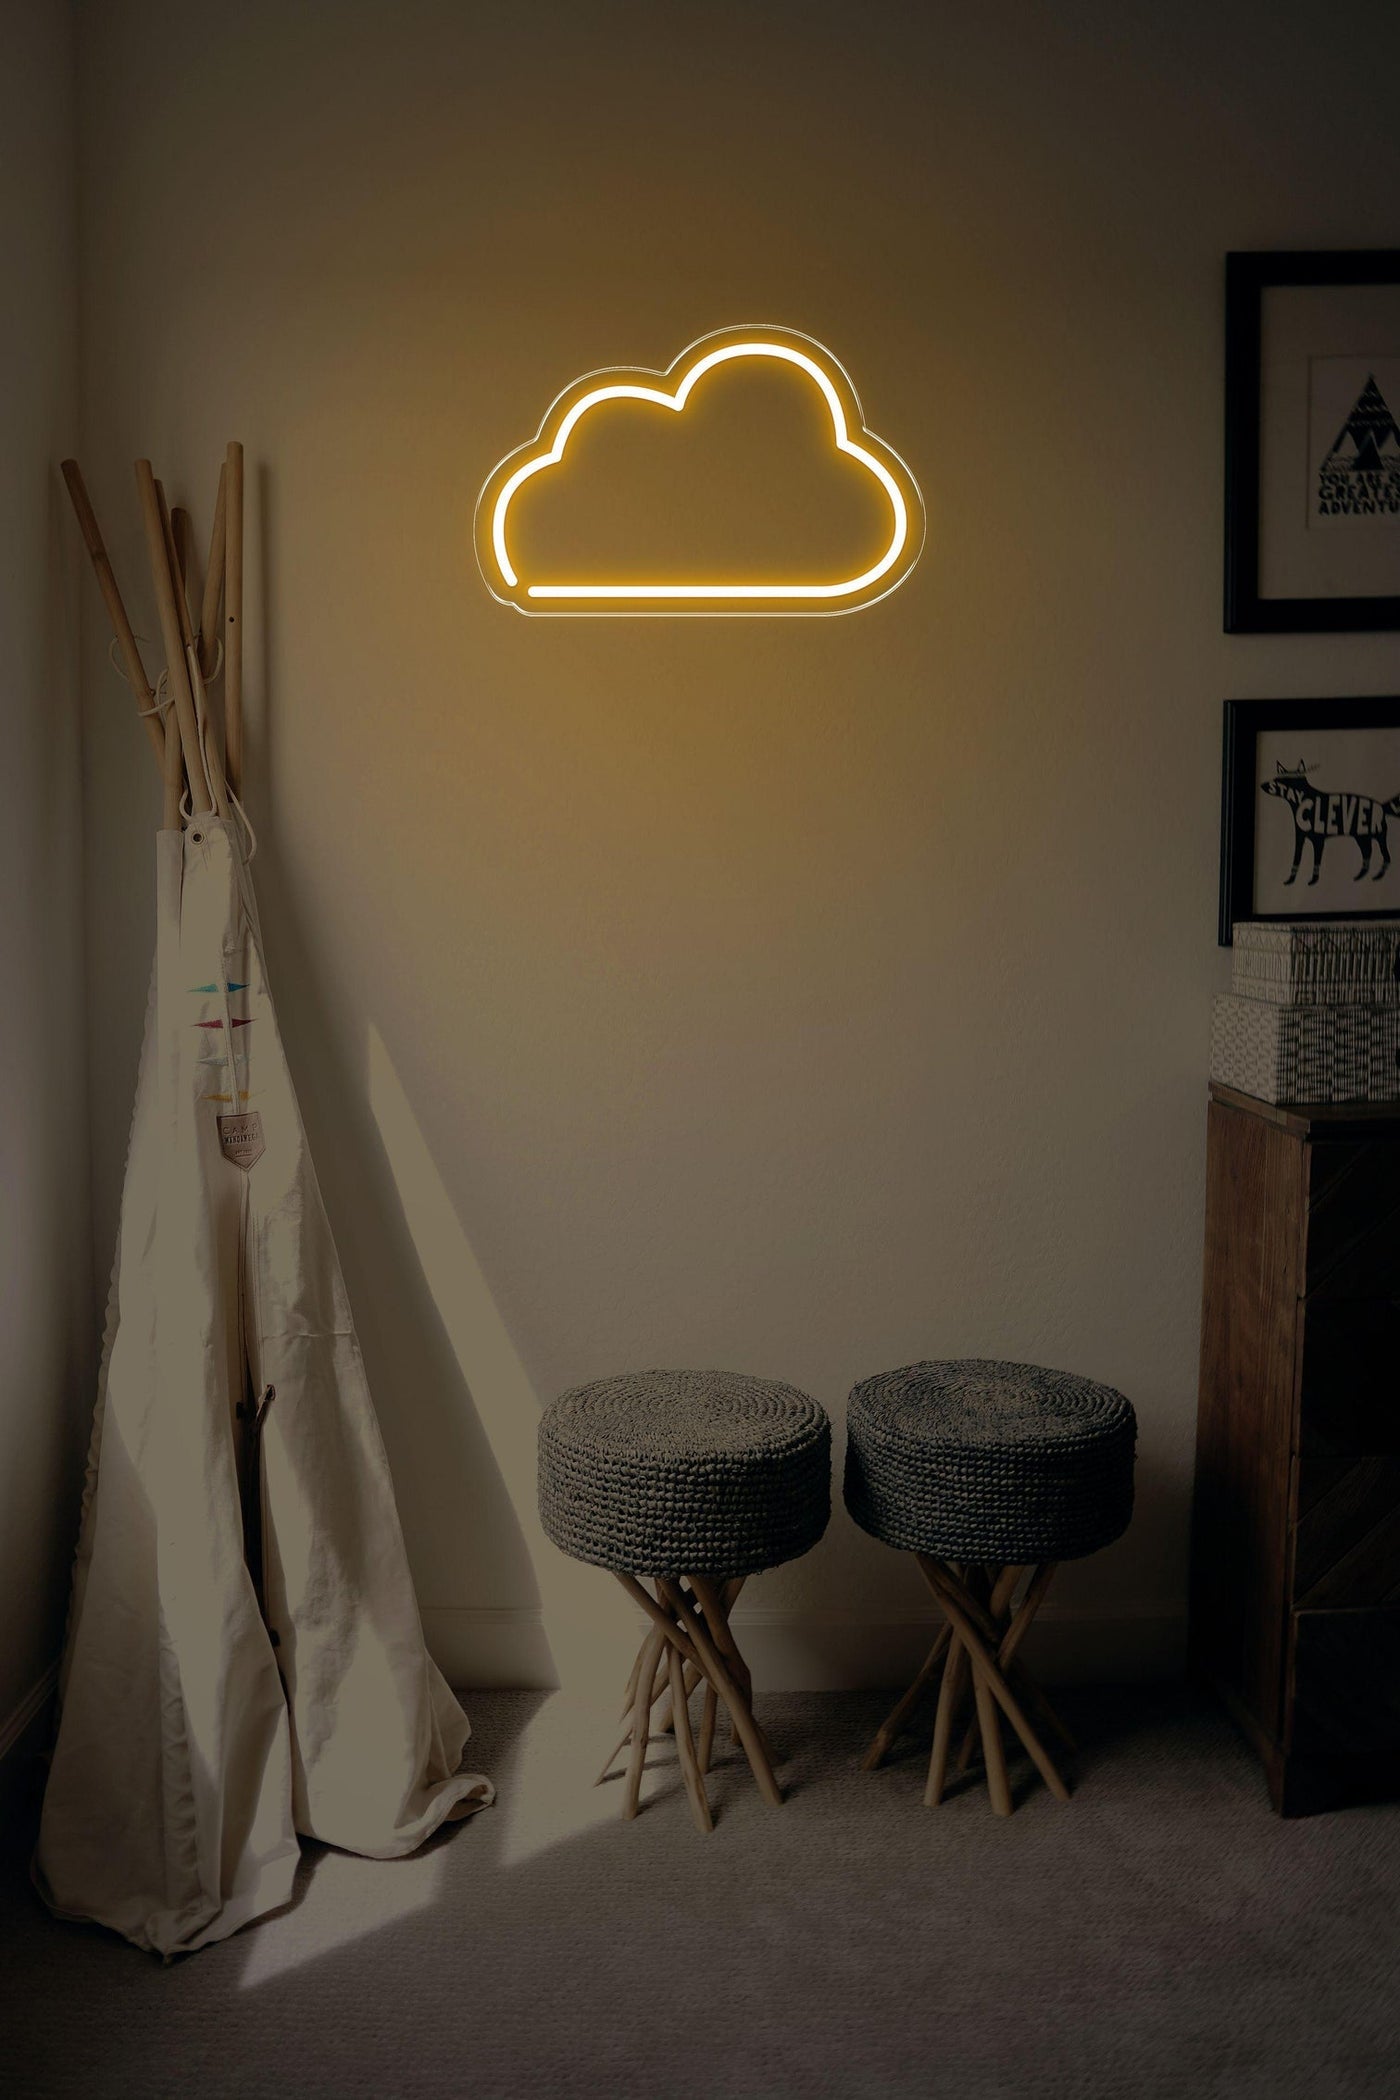 Cloud LED neon sign - 22inch x 14inchGold